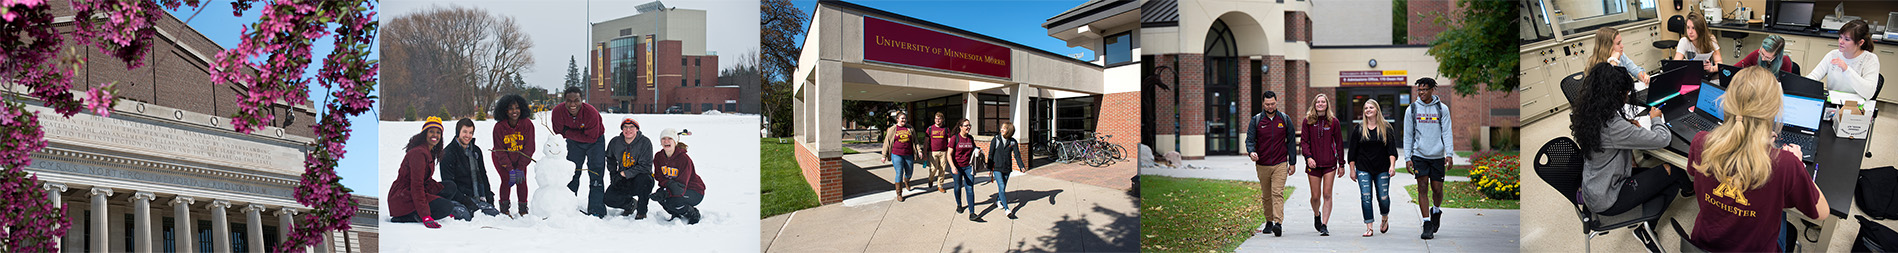 images of people at UMN banner